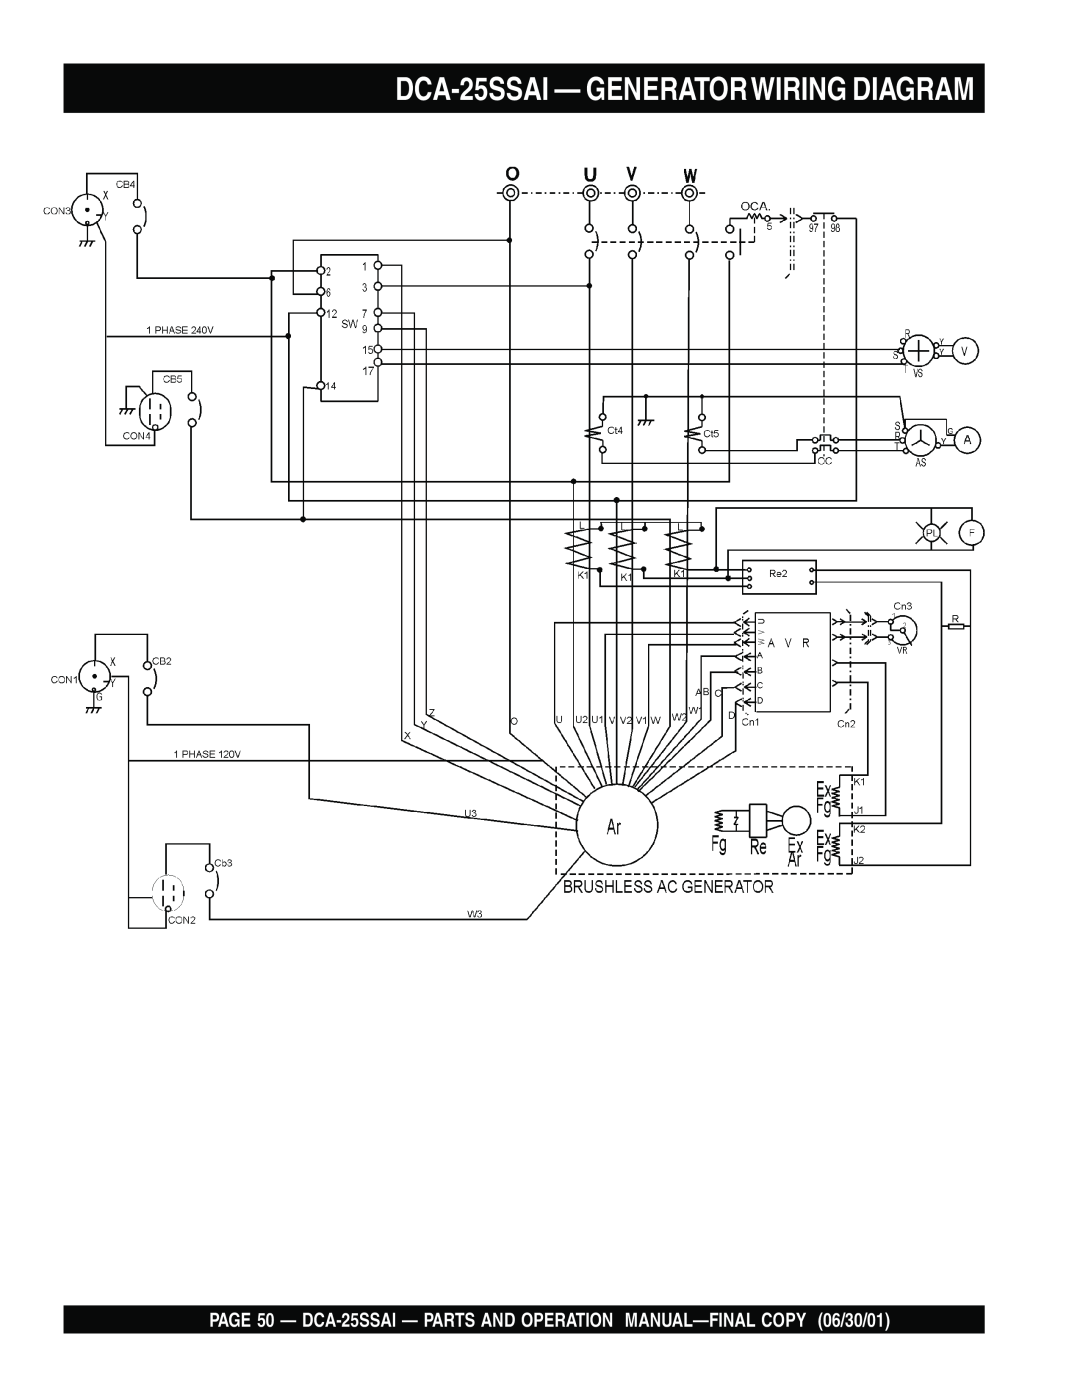 Multiquip DCA-25SSAI - GENERATORWIRING DIAGRAM, PAGE 50 - DCA-25SSAI - PARTS AND OPERATION MANUAL-FINAL COPY 06/30/01 